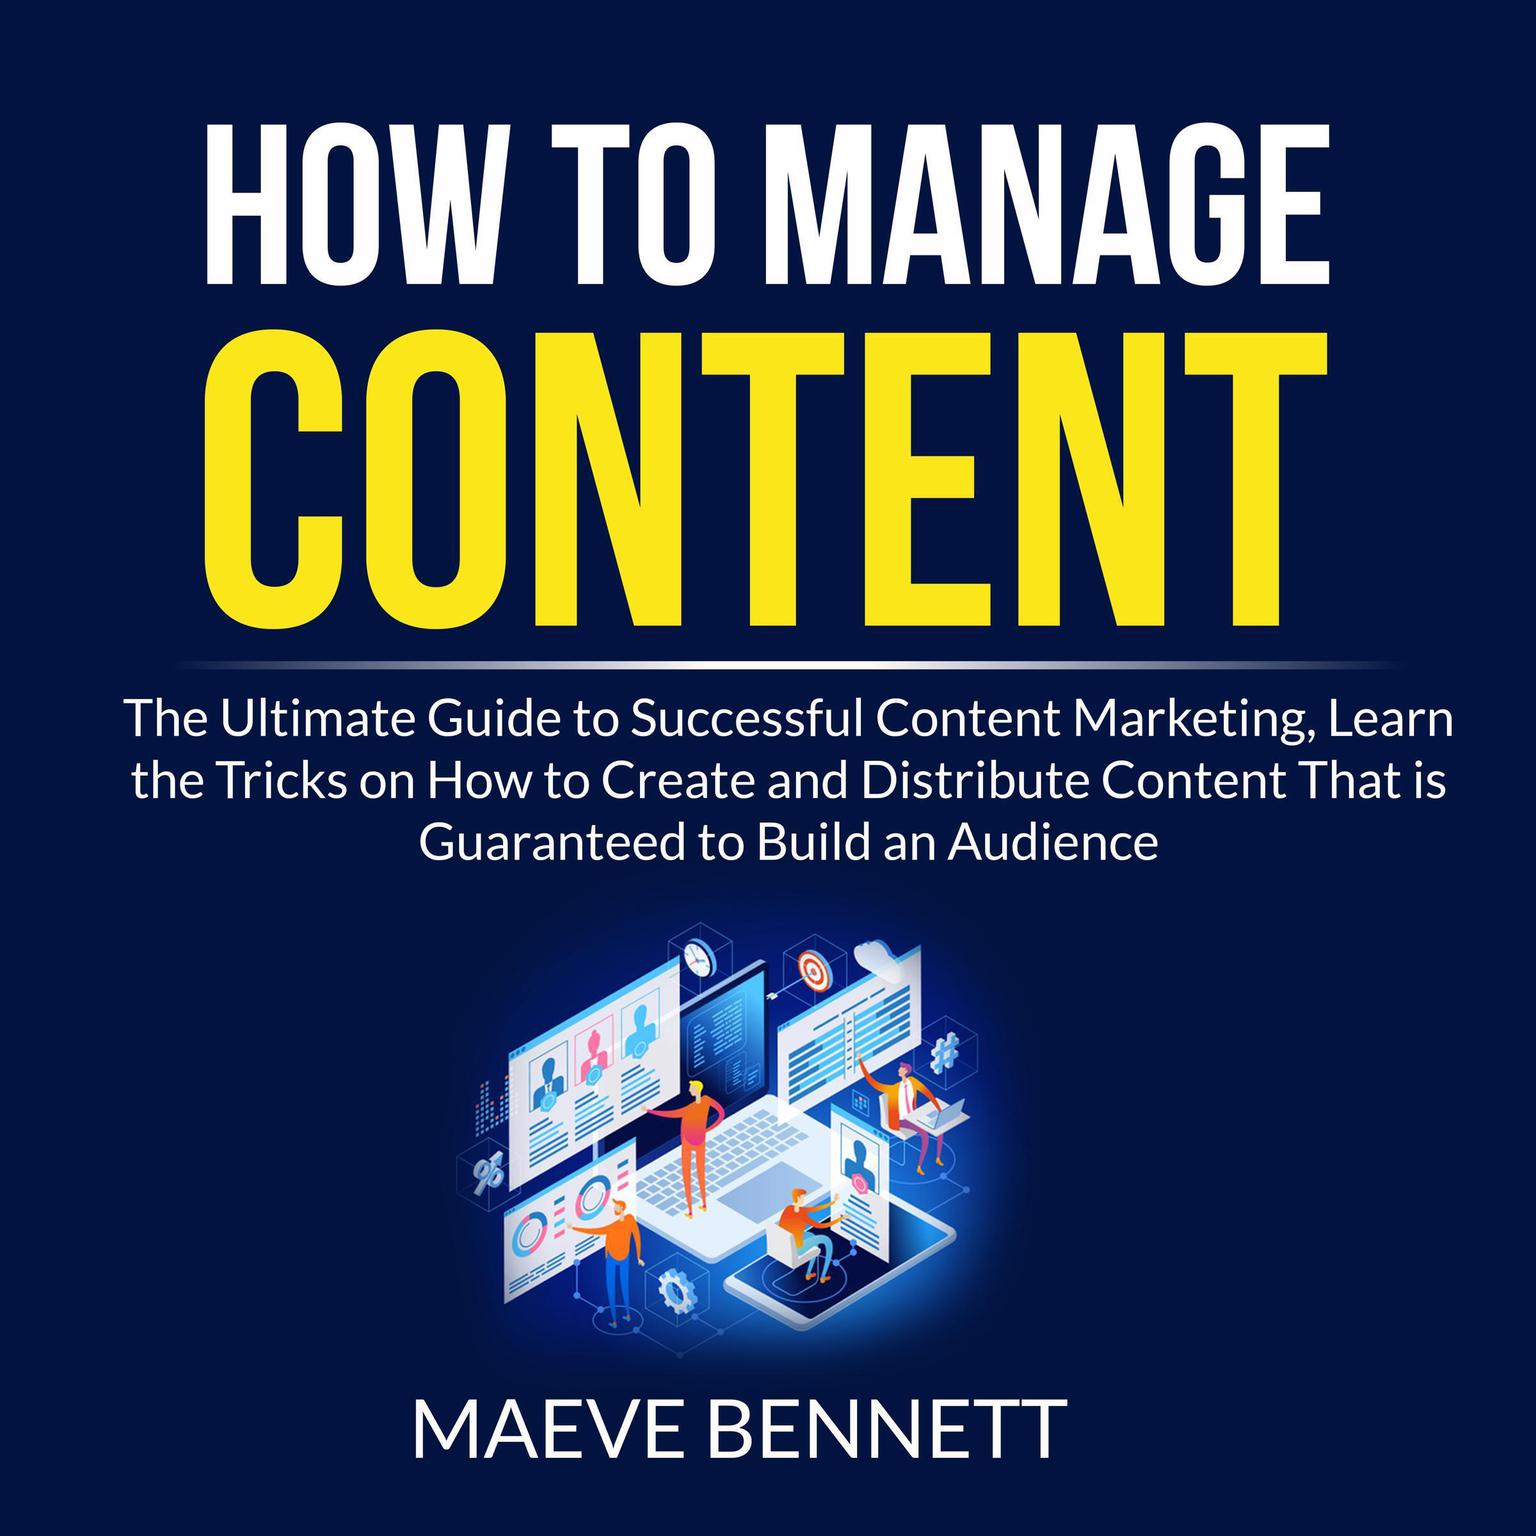 How to Manage Content: The Ultimate Guide to Successful Content Marketing, Learn the Tricks on How to Create and Distribute Content That is Guaranteed to Build an Audience Audiobook, by Maeve Bennett